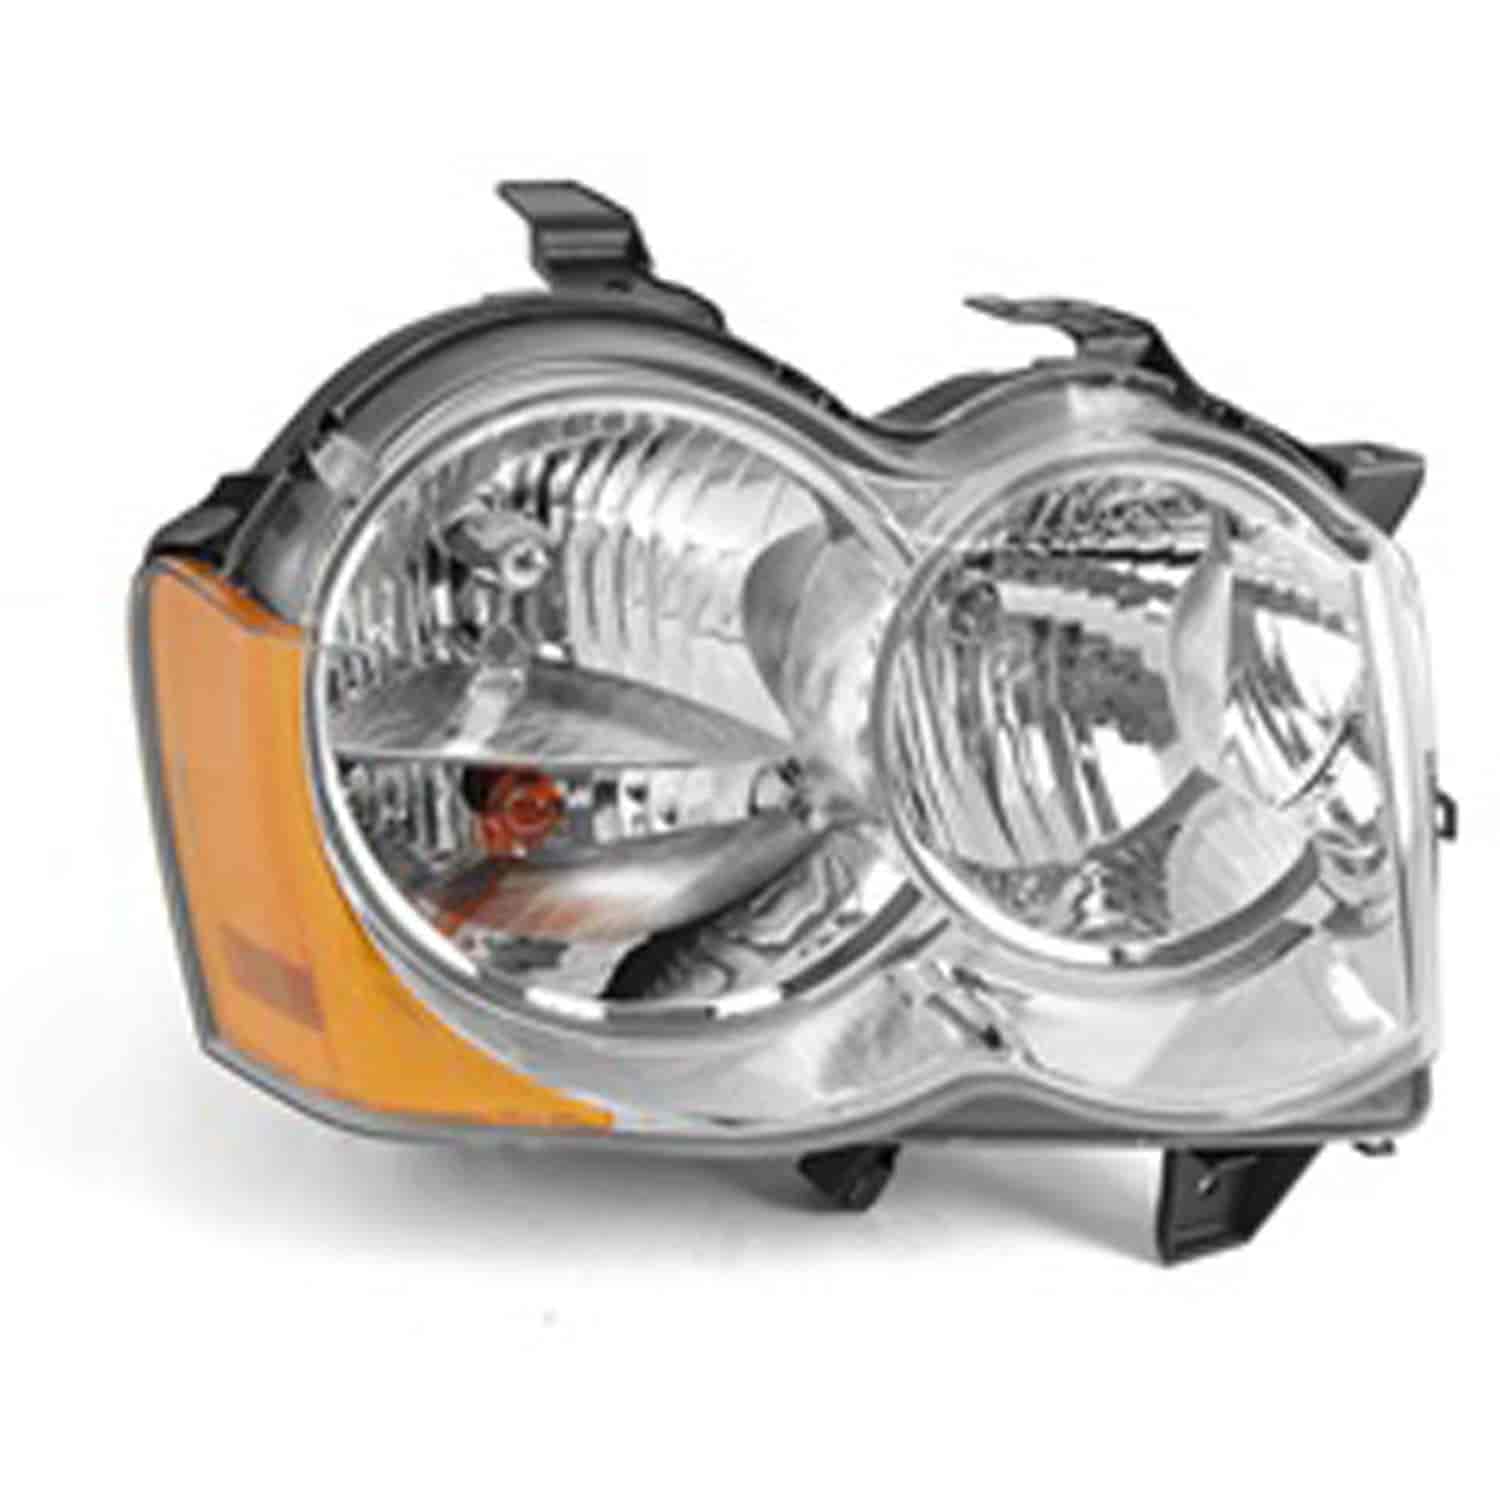 Replacement headlight assembly from Omix-ADA, Fits right side of 08-10 Jeep Liberty KKs and WK Grand Cherokee